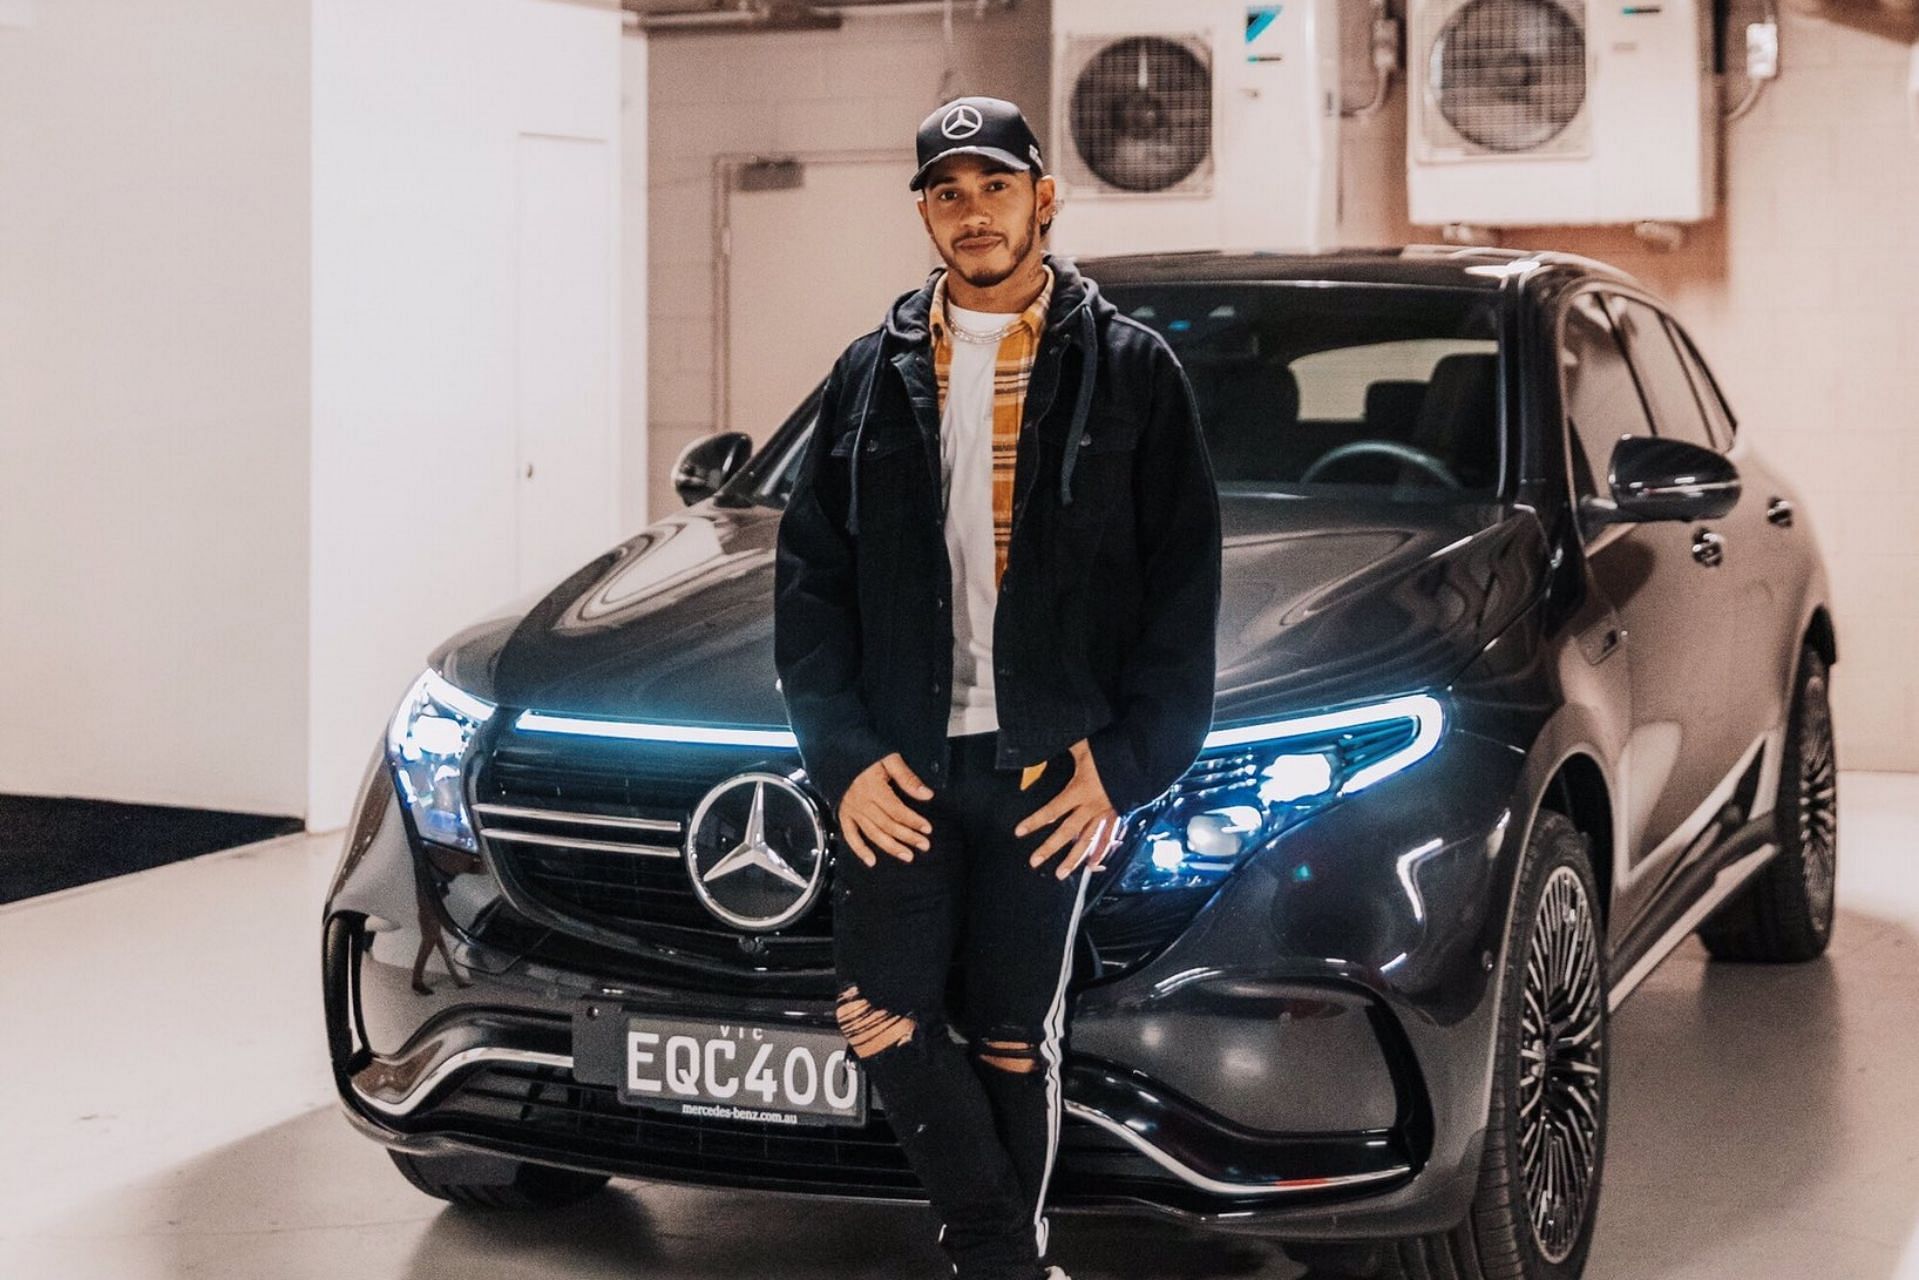 Hamilton with his new Mercedes-Benz EQC back in 2022 (Image via Twitter/@MercedesAMGF1)